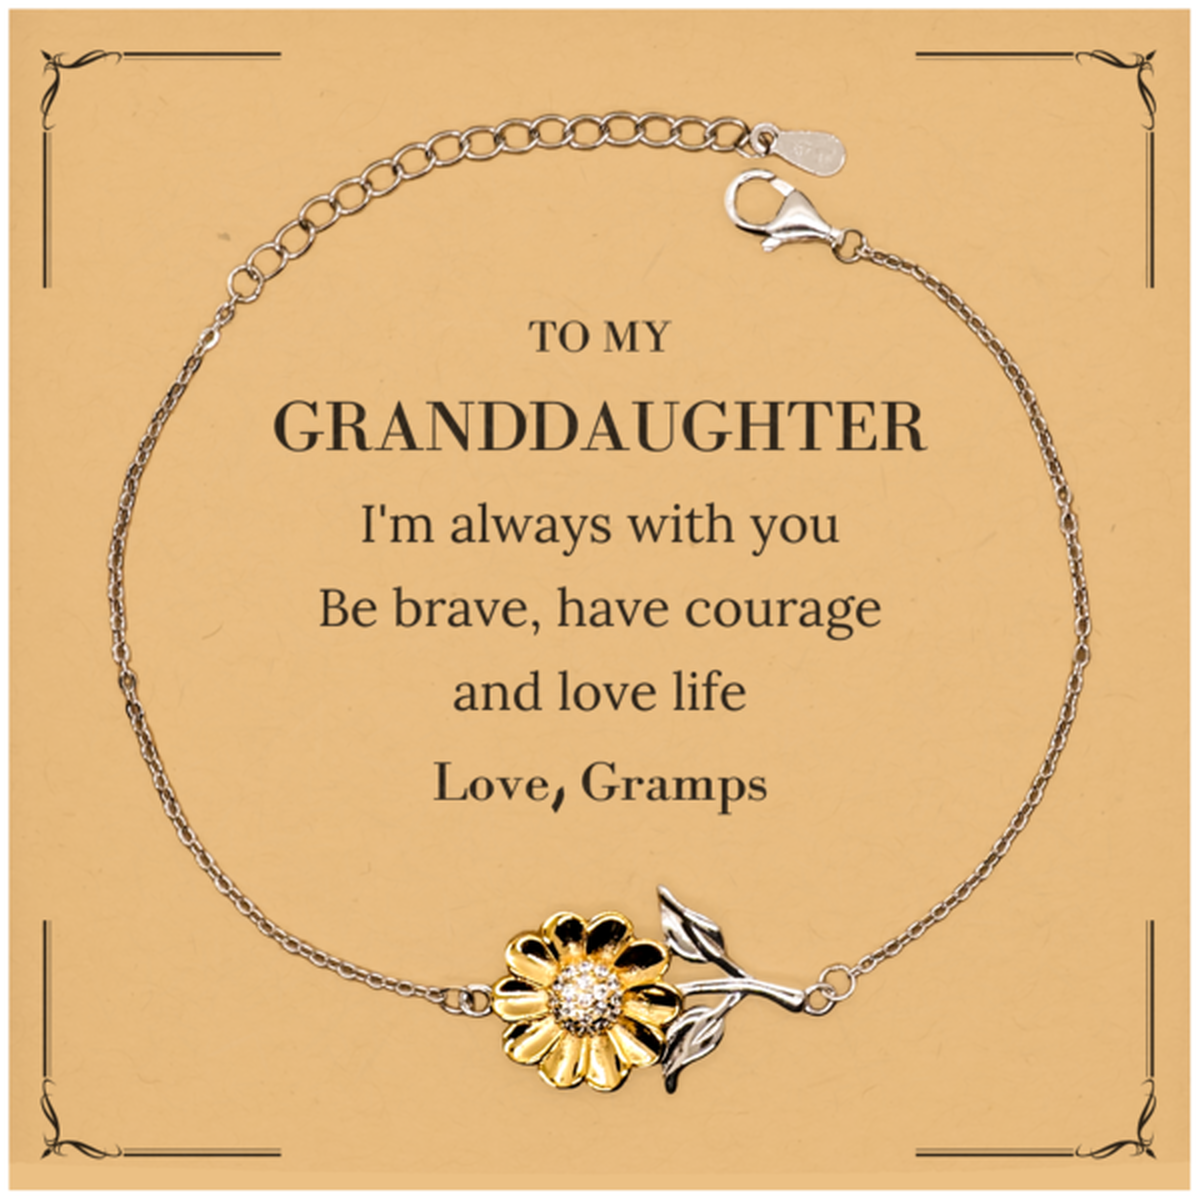 To My Granddaughter Gifts from Gramps, Unique Sunflower Bracelet Inspirational Christmas Birthday Graduation Gifts for Granddaughter I'm always with you. Be brave, have courage and love life. Love, Gramps